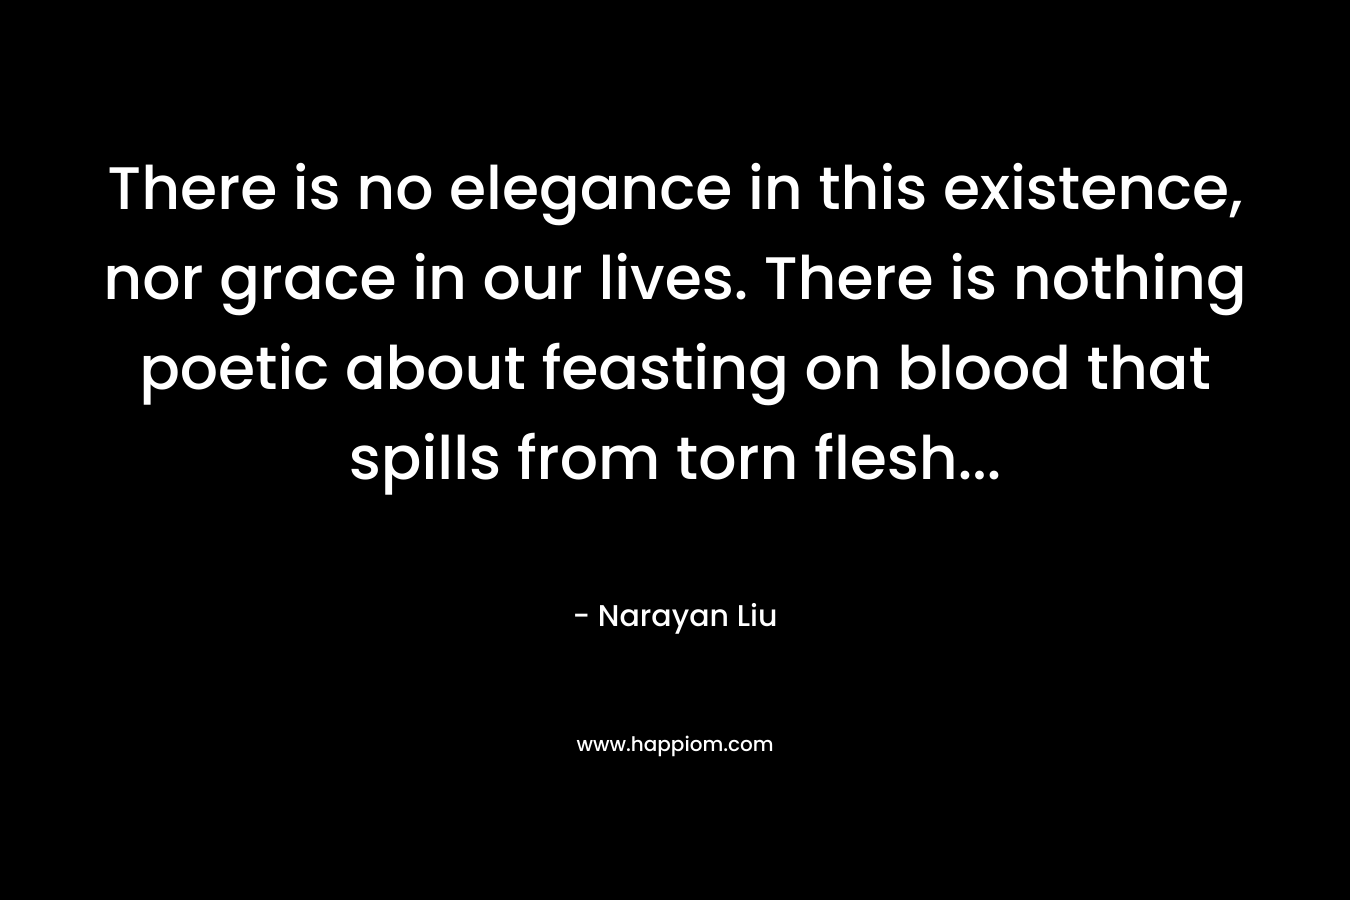 There is no elegance in this existence, nor grace in our lives. There is nothing poetic about feasting on blood that spills from torn flesh… – Narayan Liu